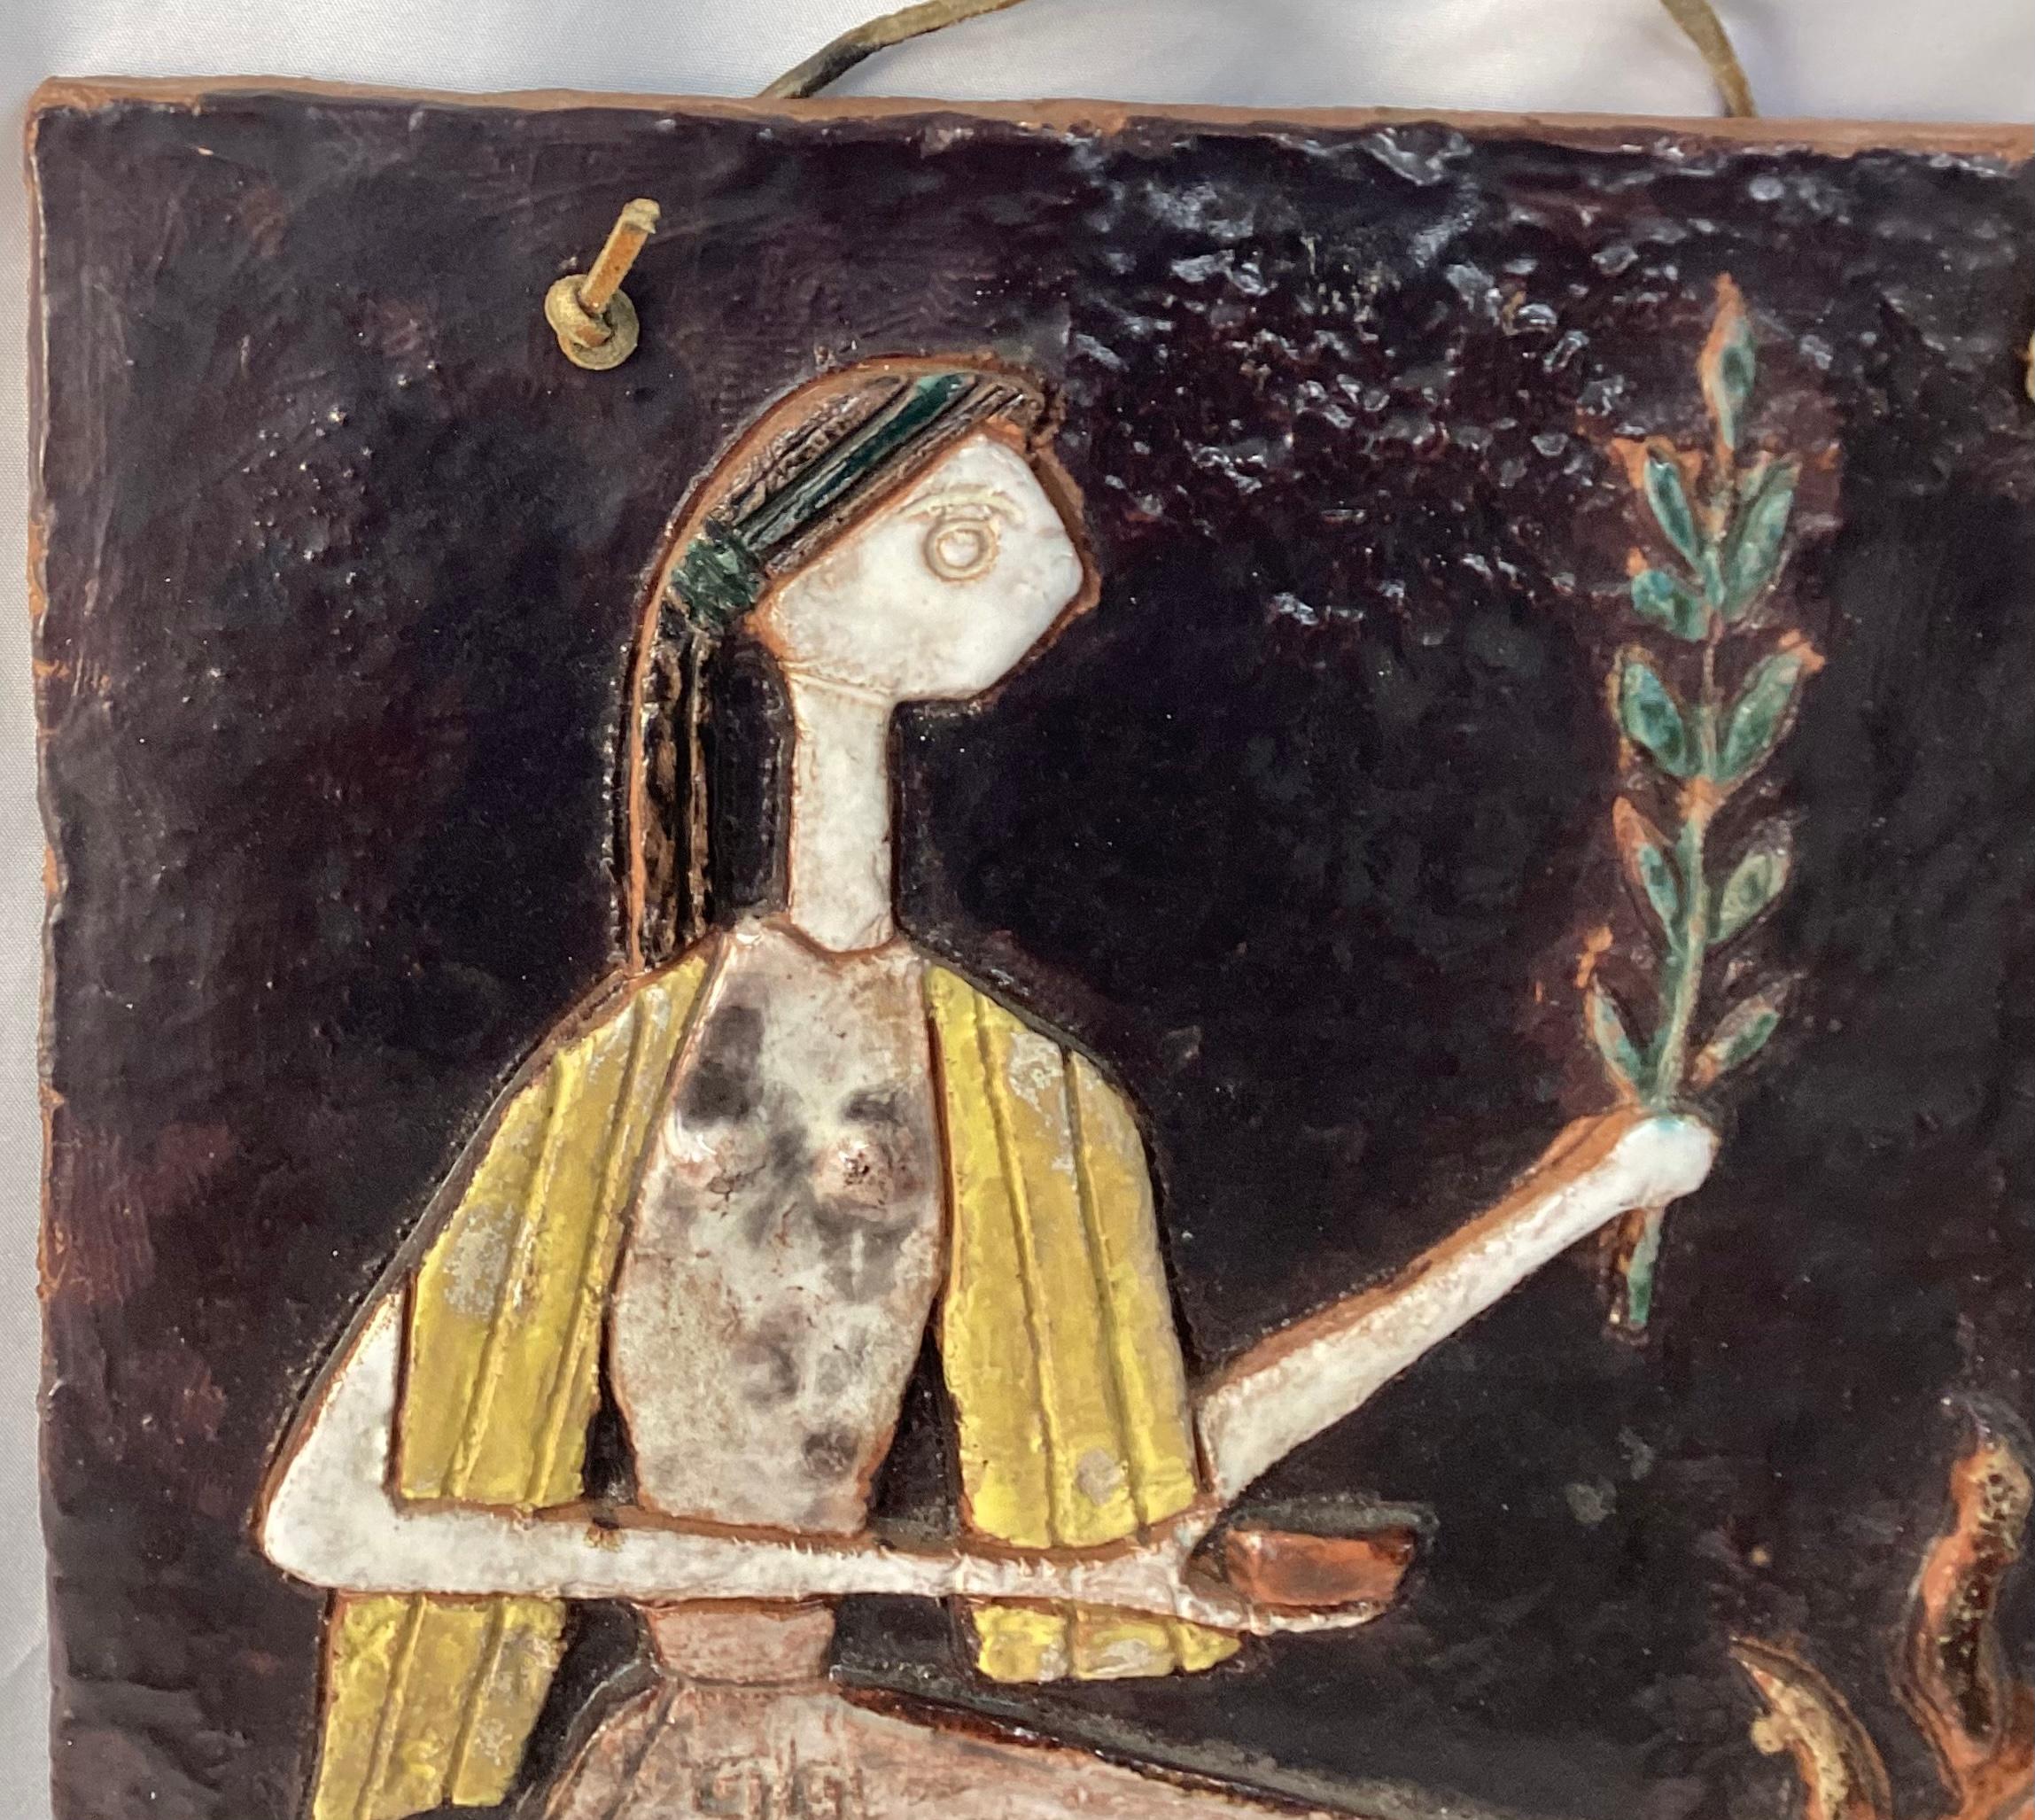 Unique ceramic art plaque of The Oracle of Delphi. The ceramic has a leather hanger at top to hang on wall. Contains colors of yellow, green and brown The Oracle of Delphi was a priestess who sat on a three-legged bronze bowl . She was known for